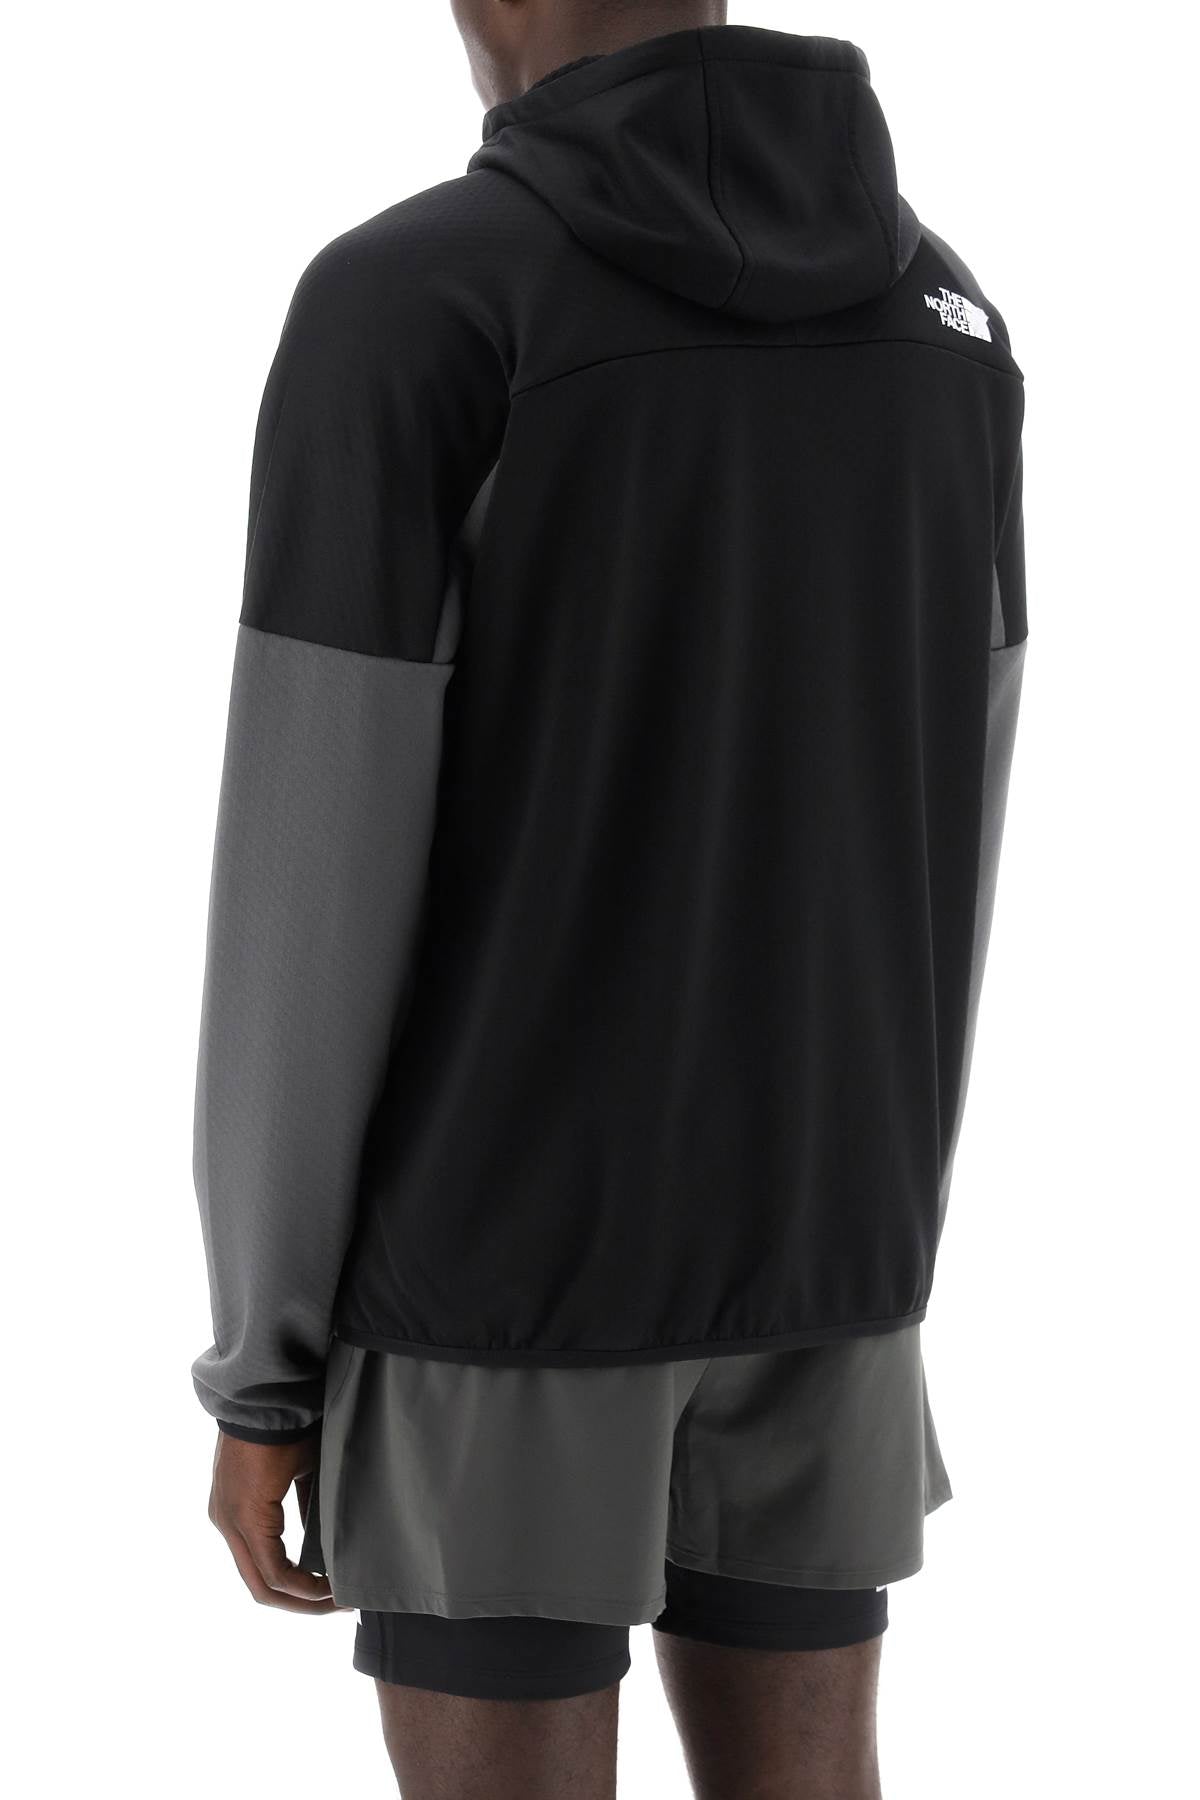 The north face mountain athletics hooded sweatshirt with-2